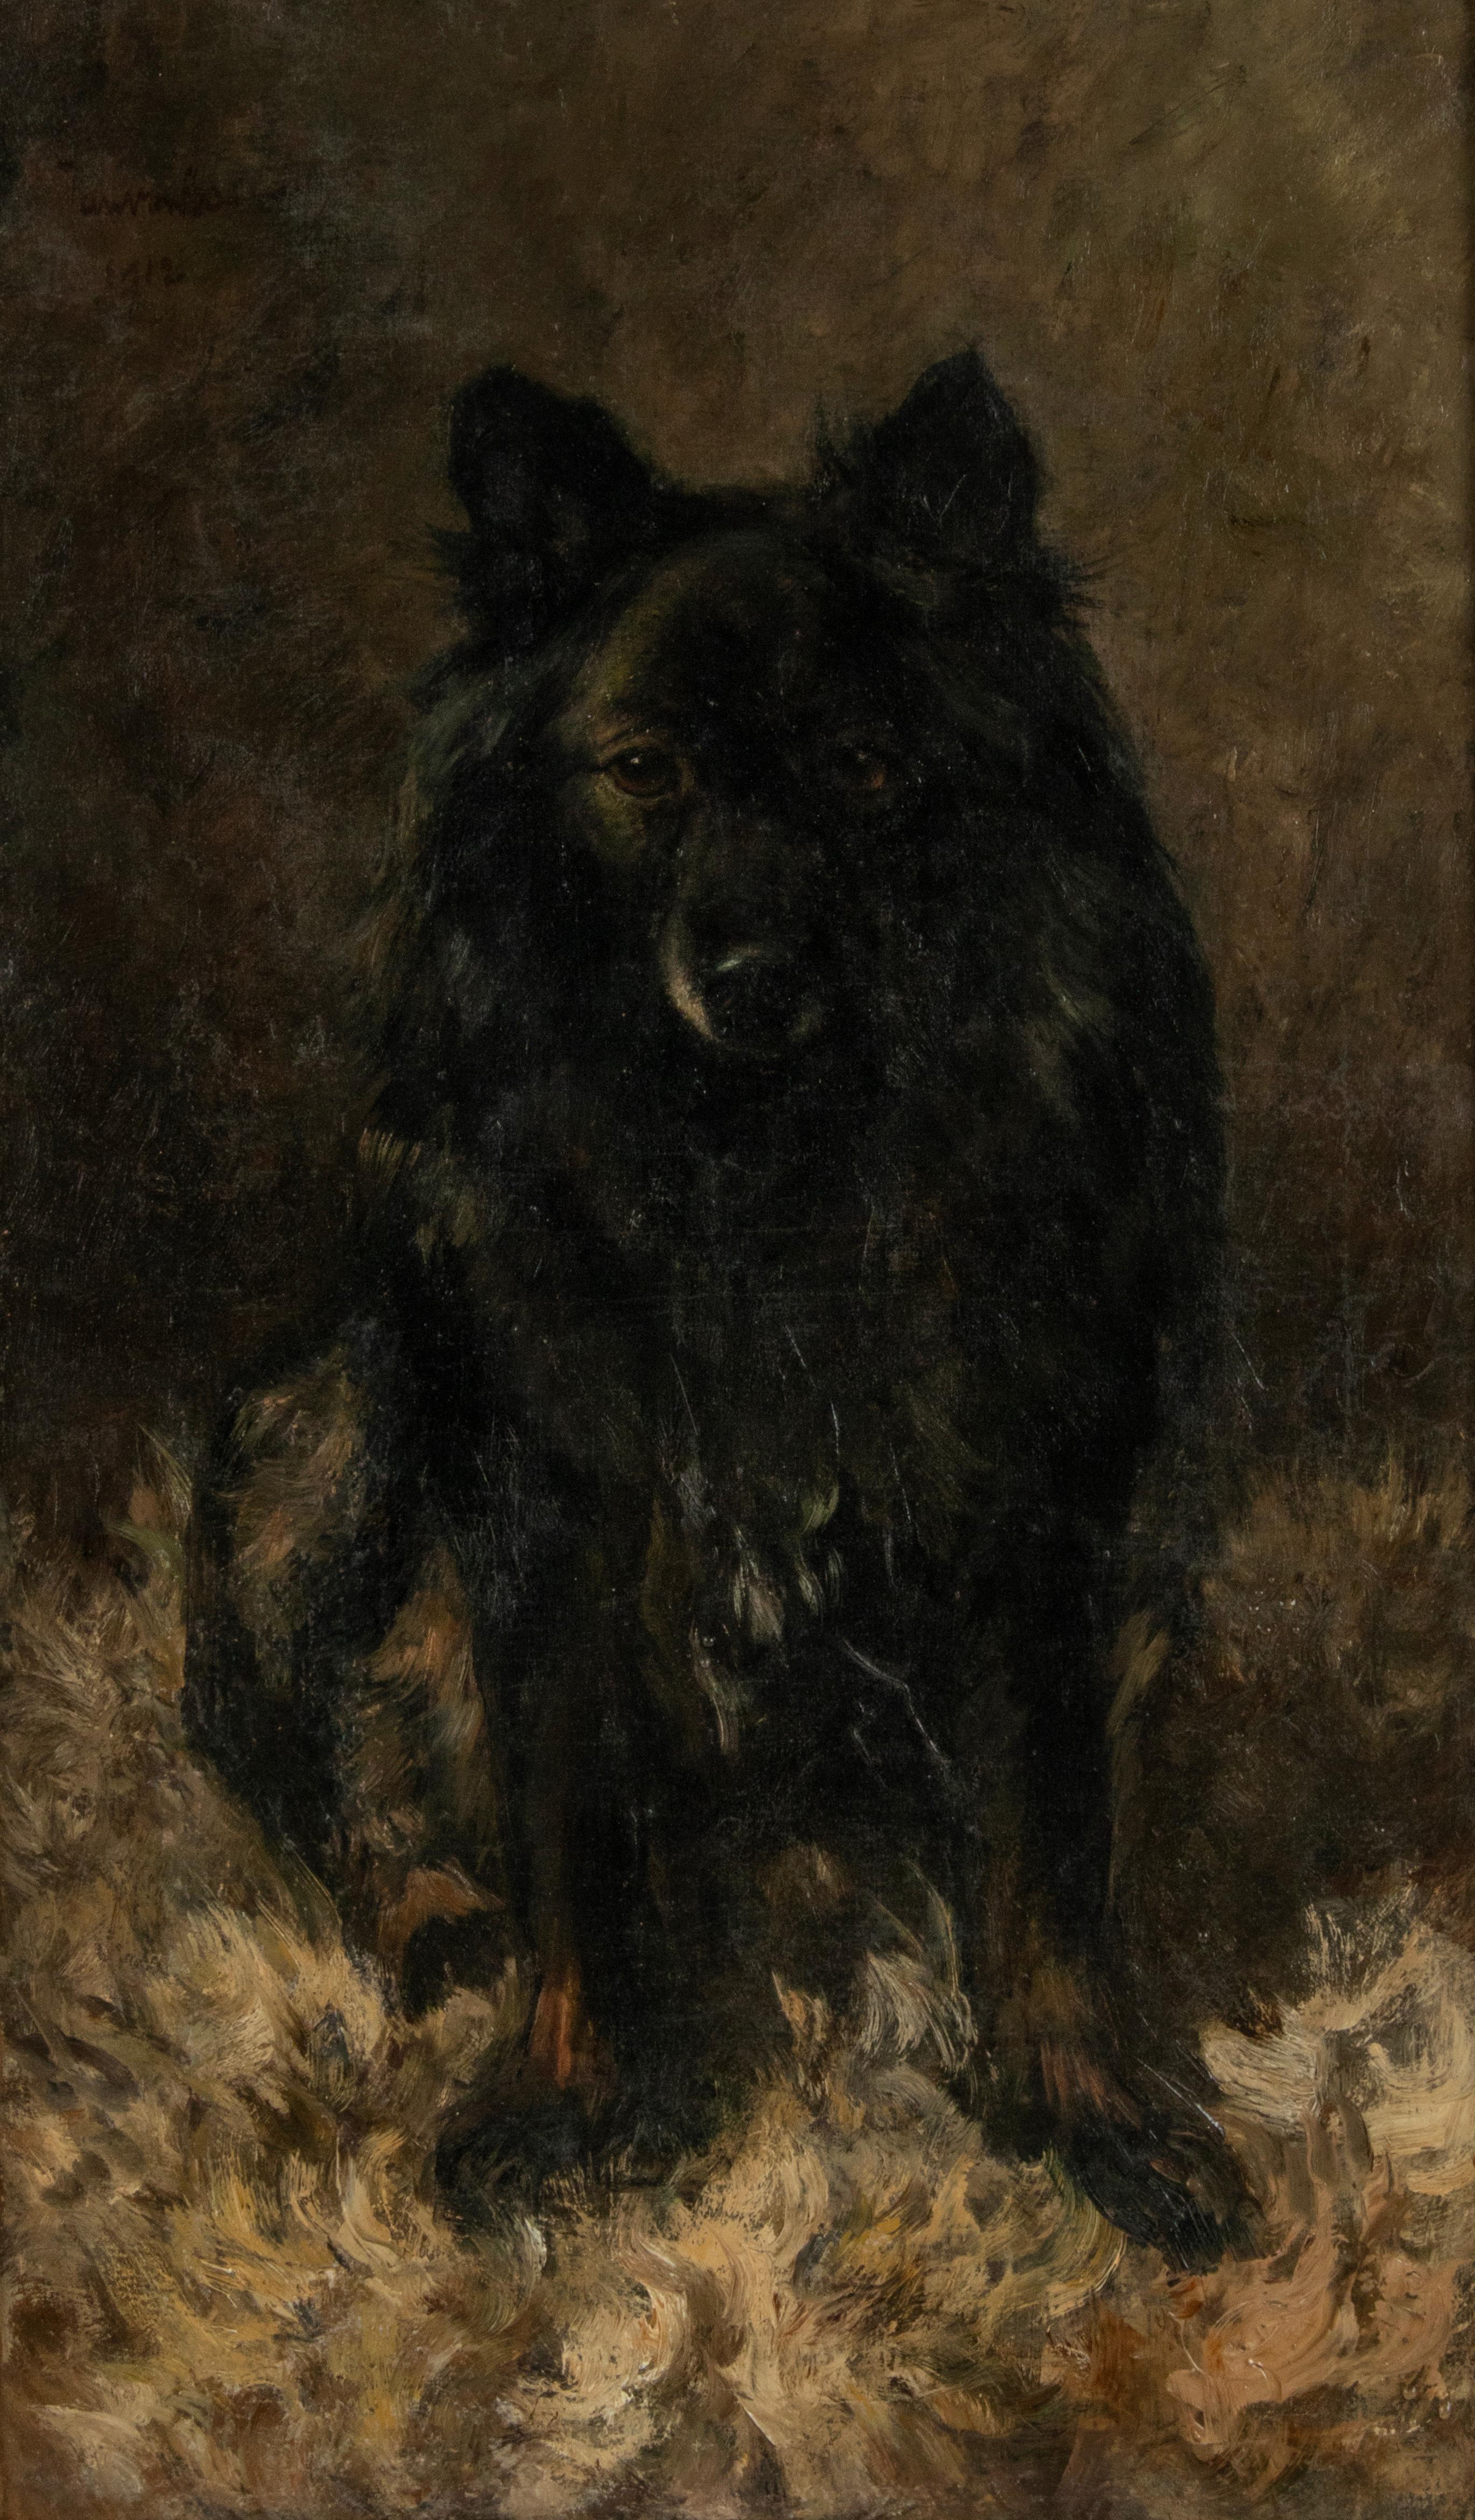 Beautiful dog portrait by the Dutch painter Jan Essen. The painting shows a Schipperke, which is a breed of dog that used to be more common than it is now. It is a small-sized shepherd, of Belgian origin. The painter has succeeded in portraying the